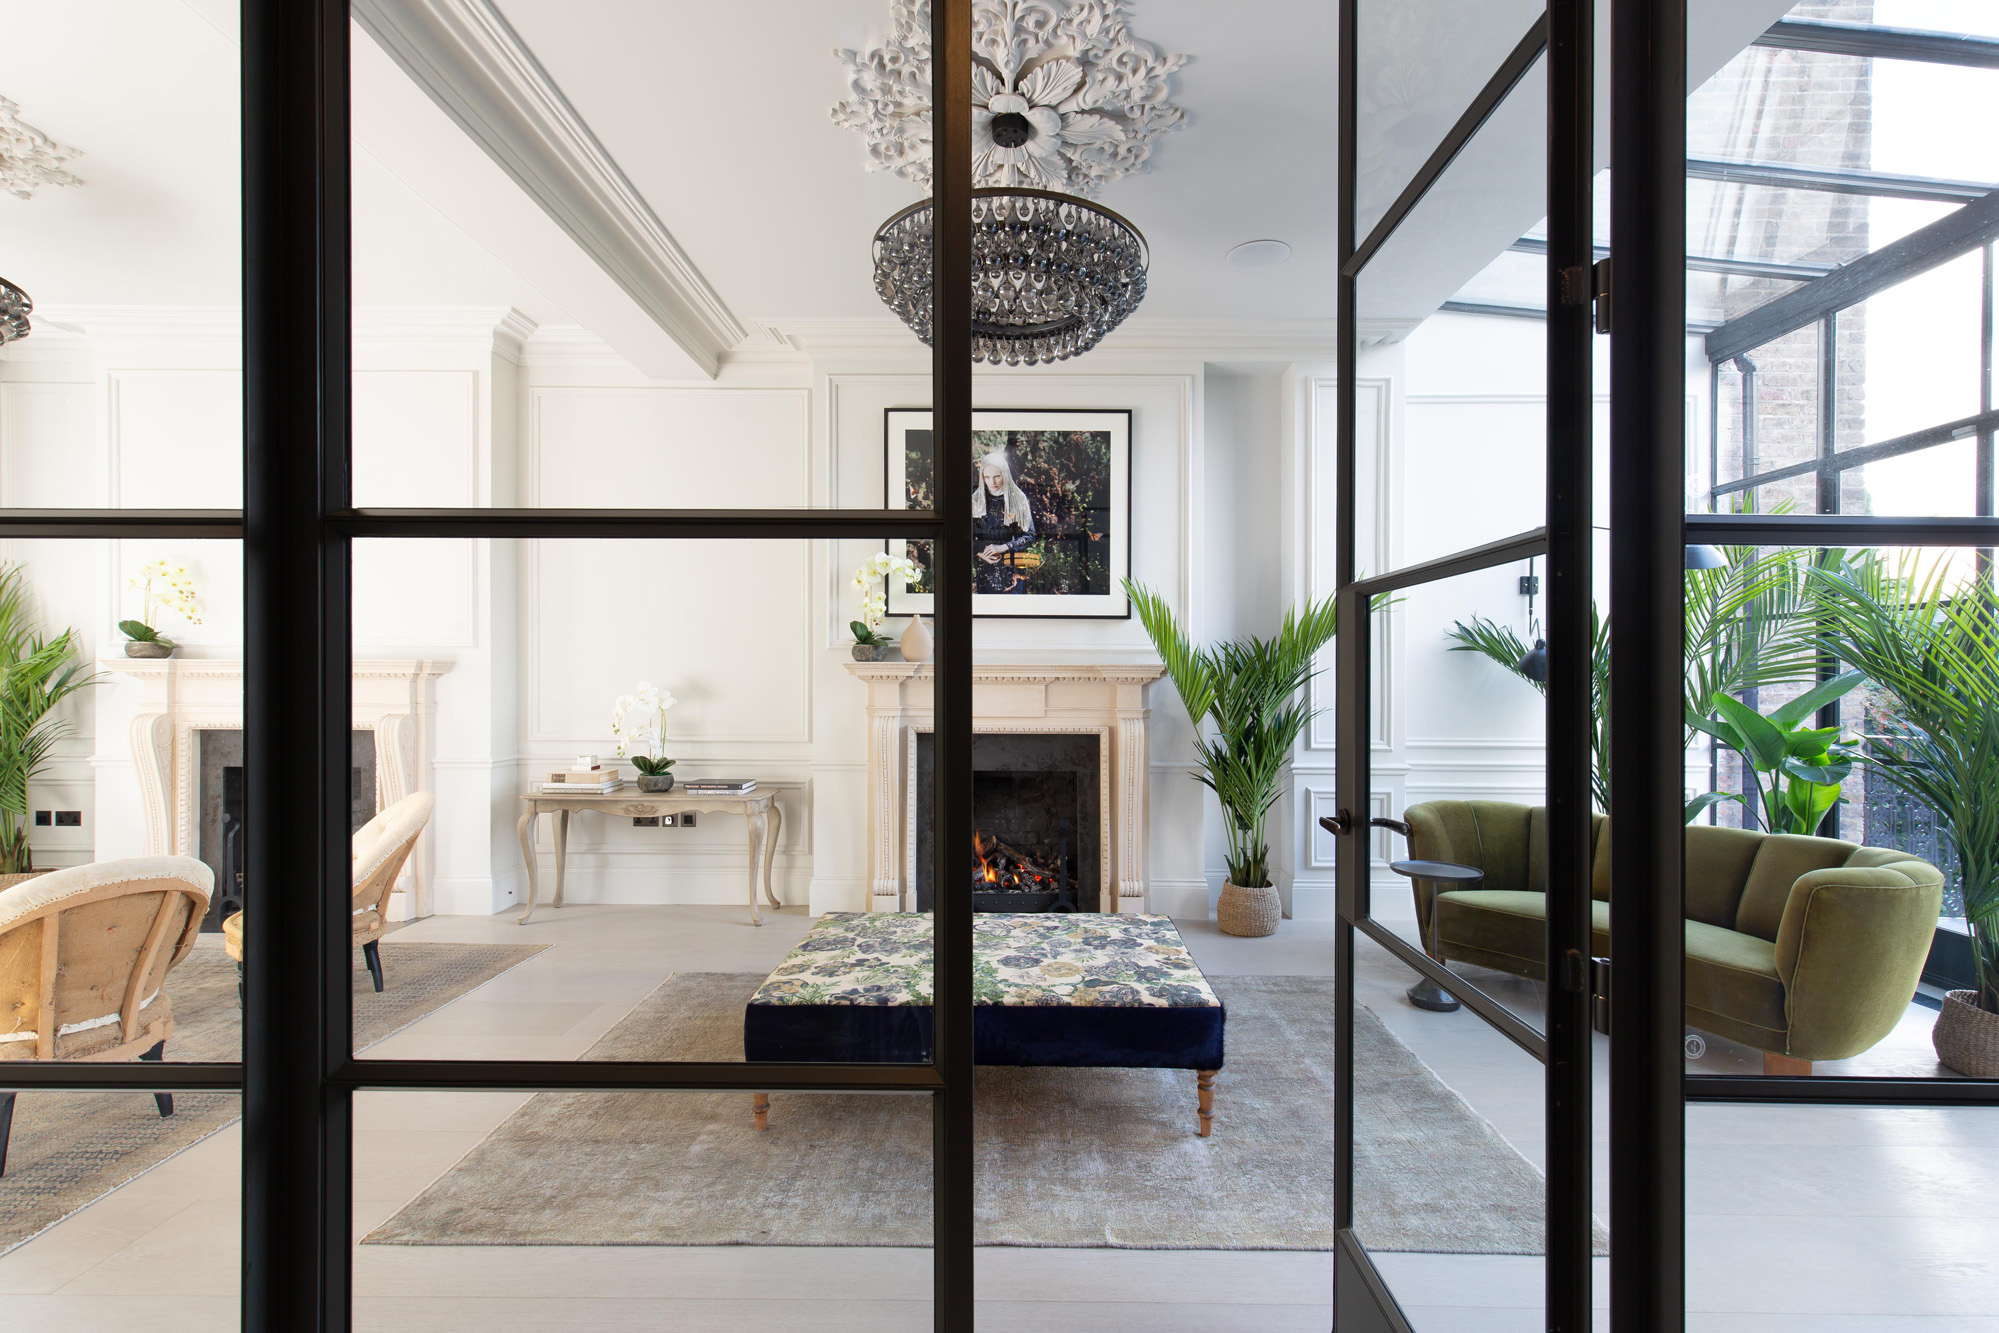 For Sale: Chepstow Villas Notting Hill W11 luxury reception room with Crittall windows